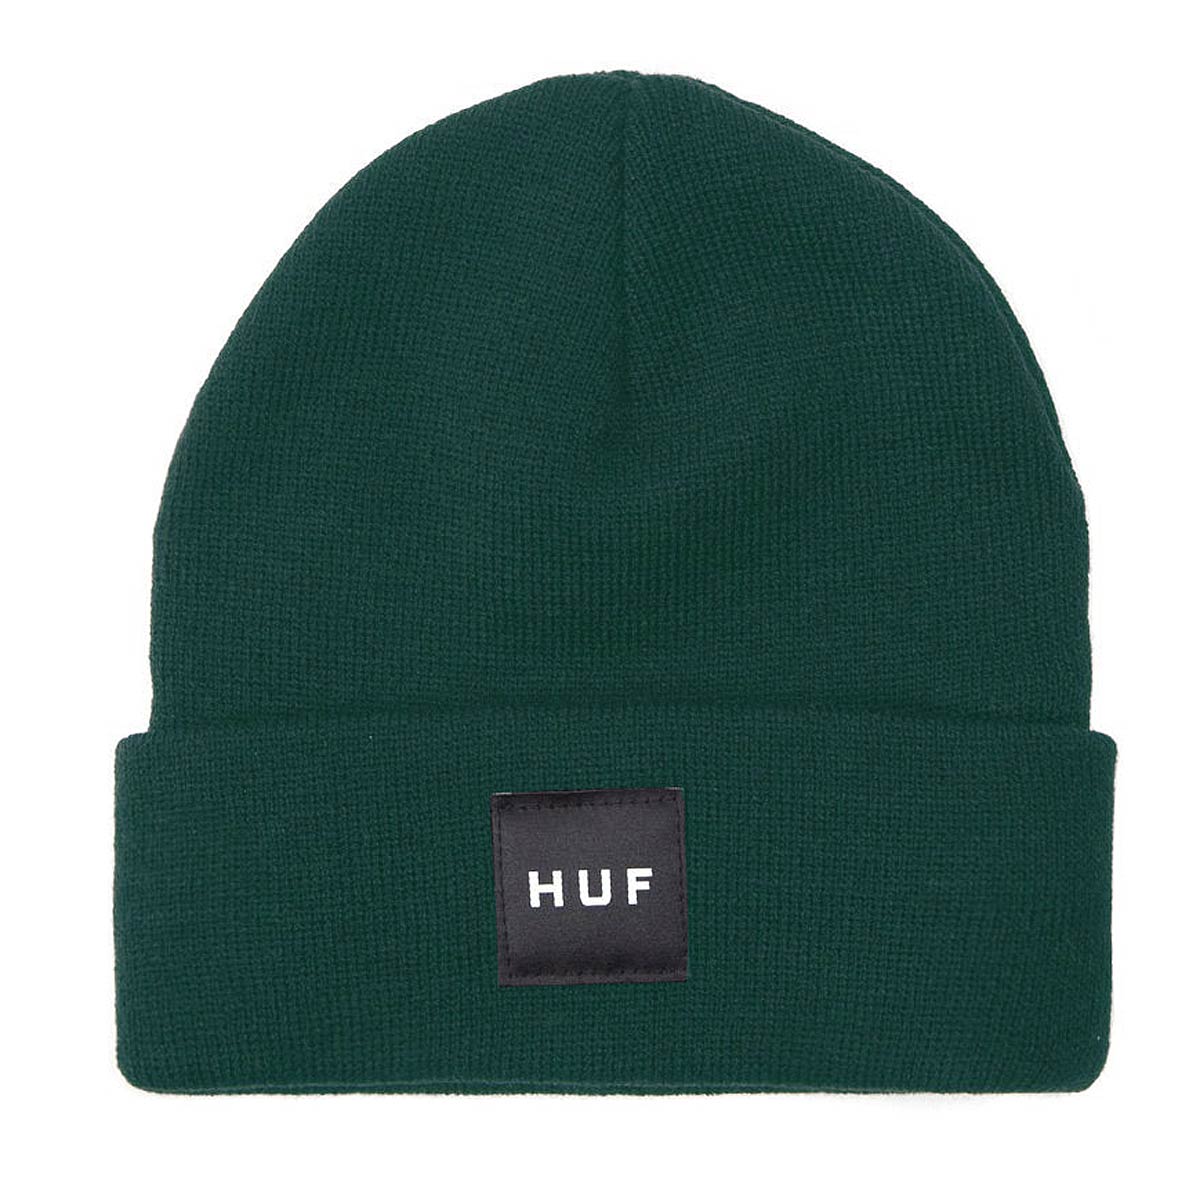 Huf Huf Essentials Usual Beanie, Sycamore